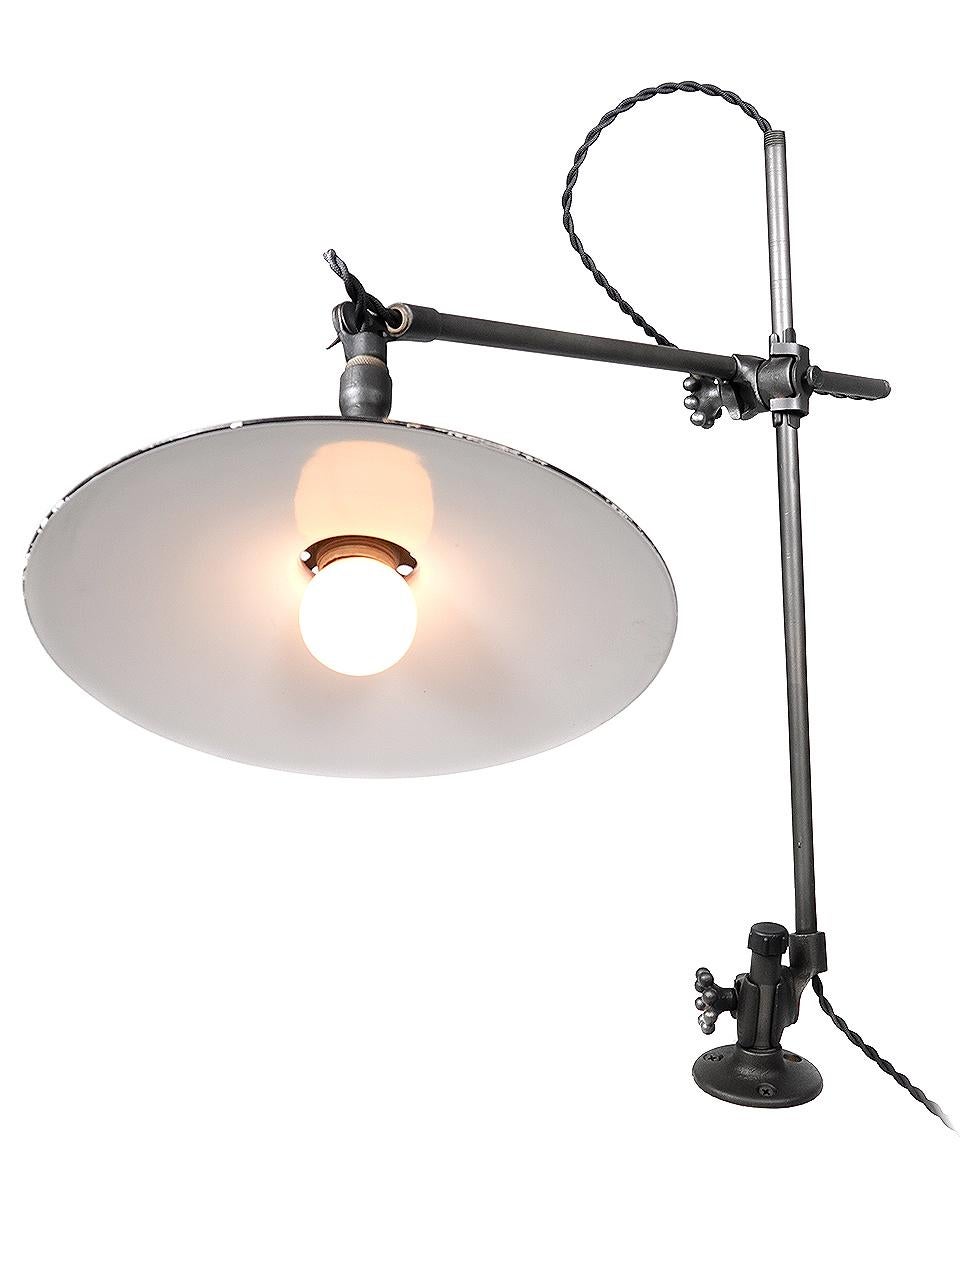 Industrial Original O. C. White Articulated Wall or Desk Lamp, Red Shade For Sale